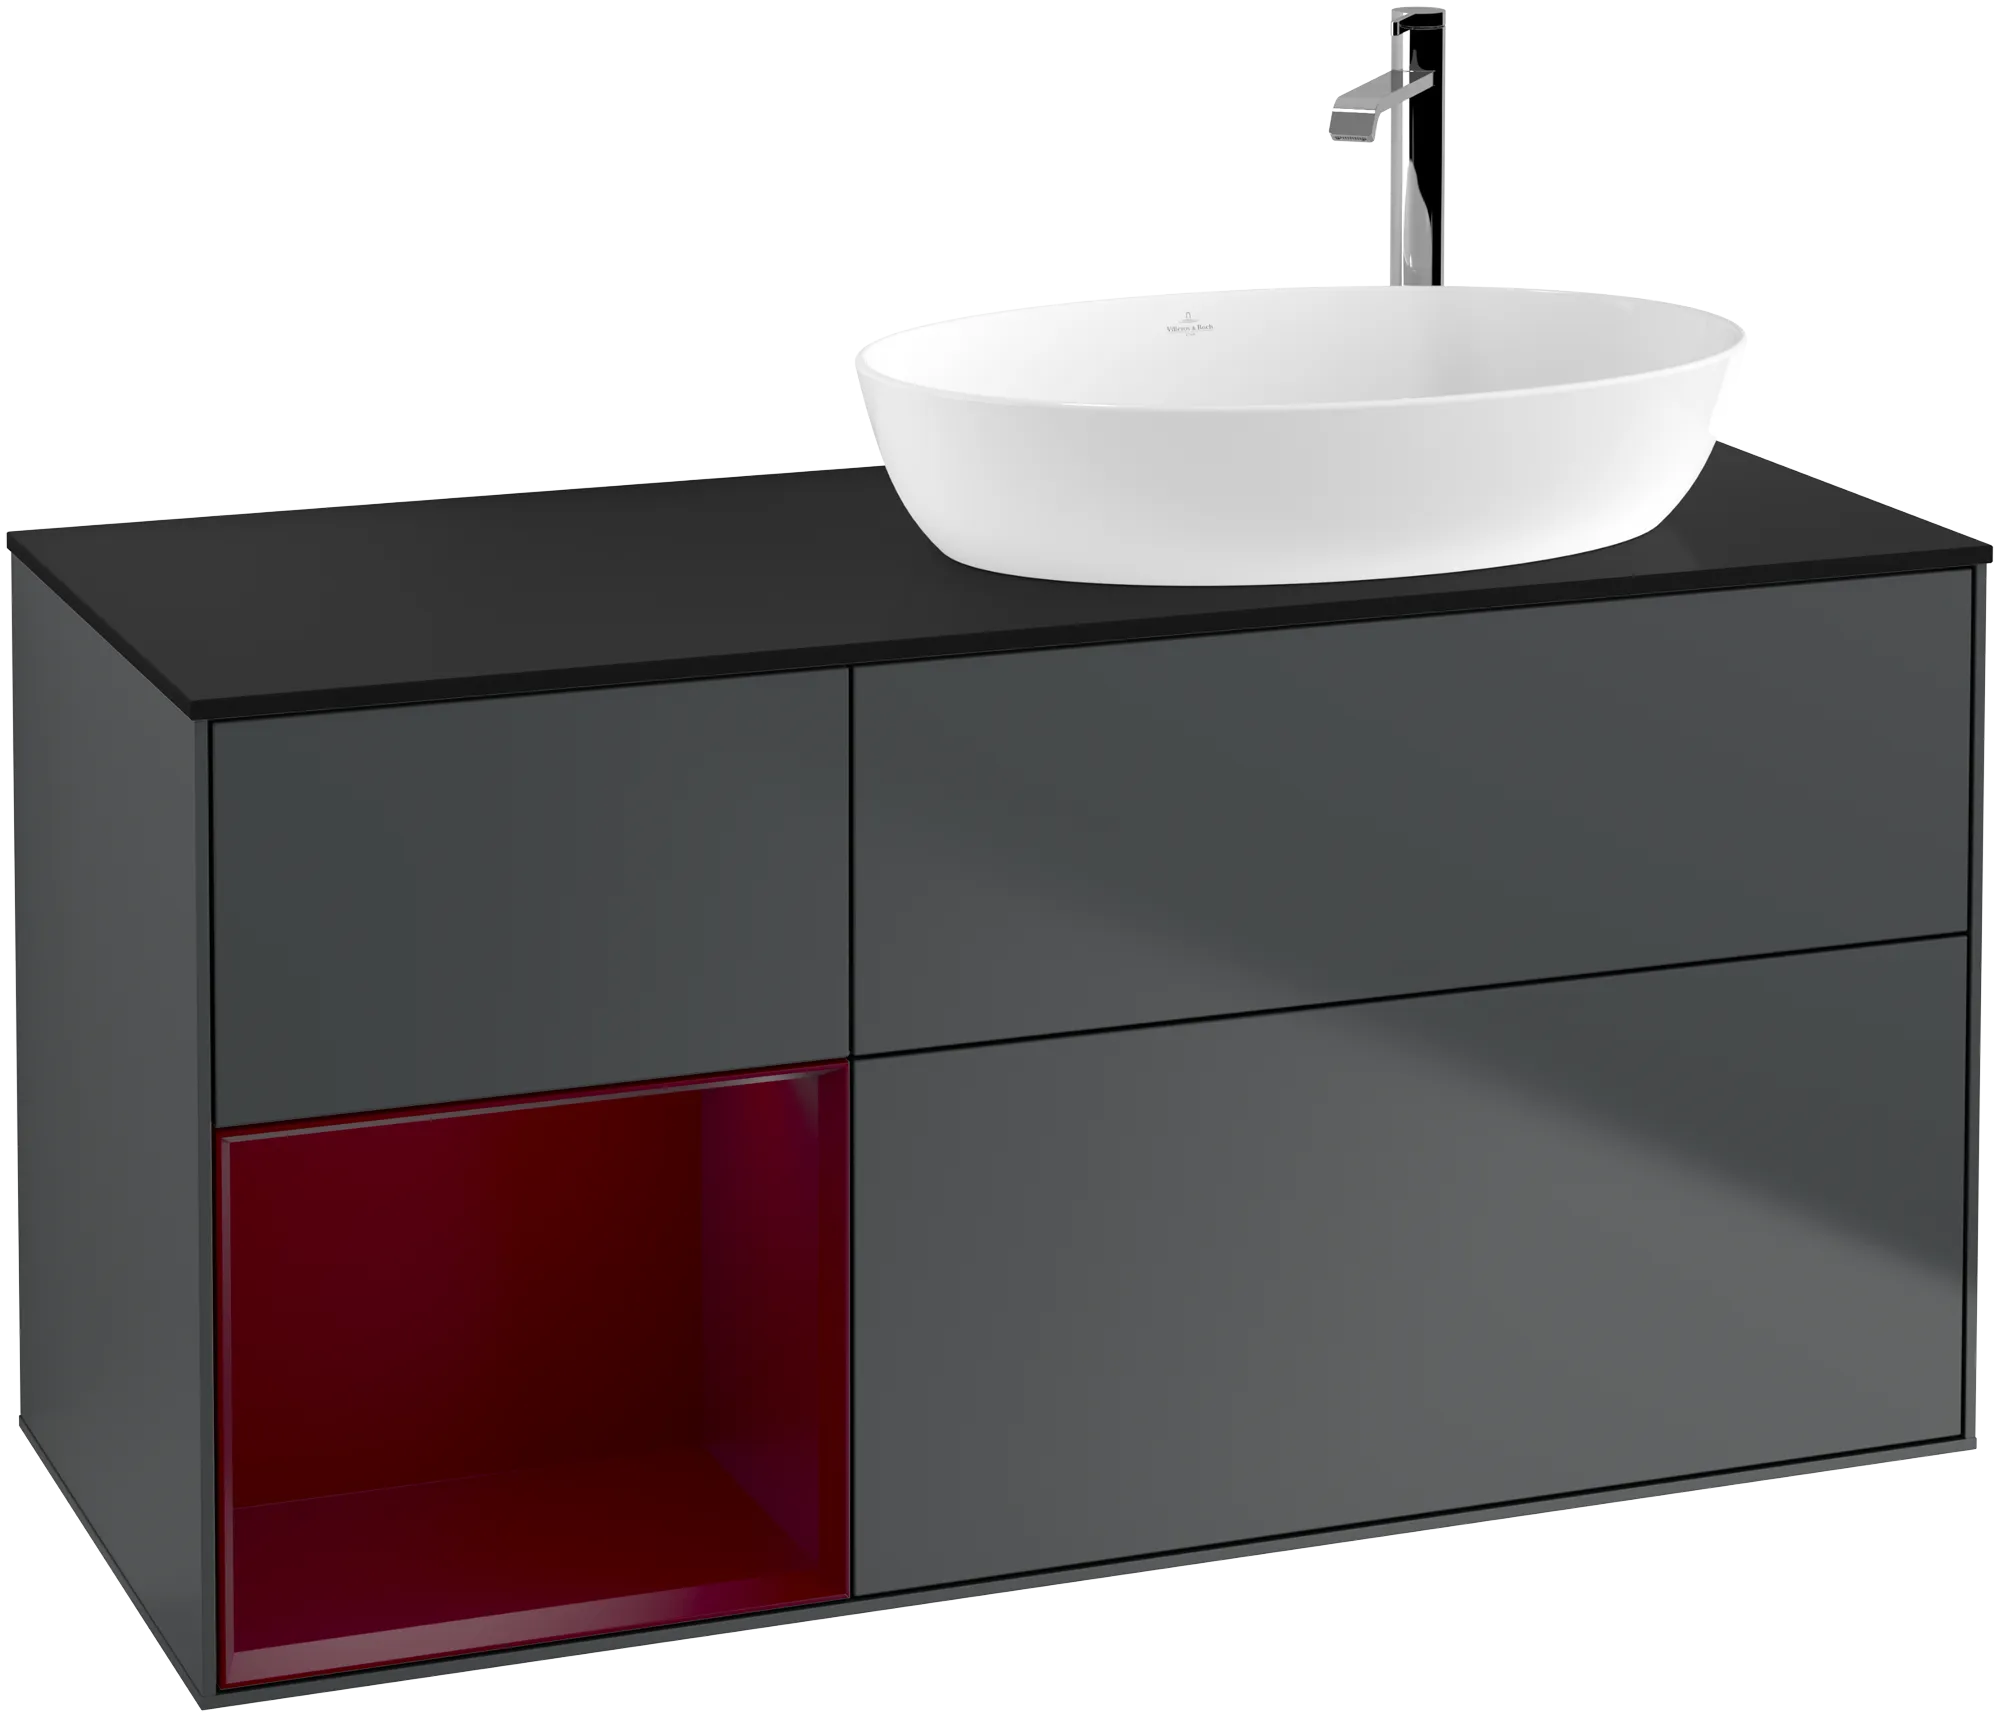 Picture of VILLEROY BOCH Finion Vanity unit, with lighting, 3 pull-out compartments, 1200 x 603 x 501 mm, Midnight Blue Matt Lacquer / Peony Matt Lacquer / Glass Black Matt #G922HBHG